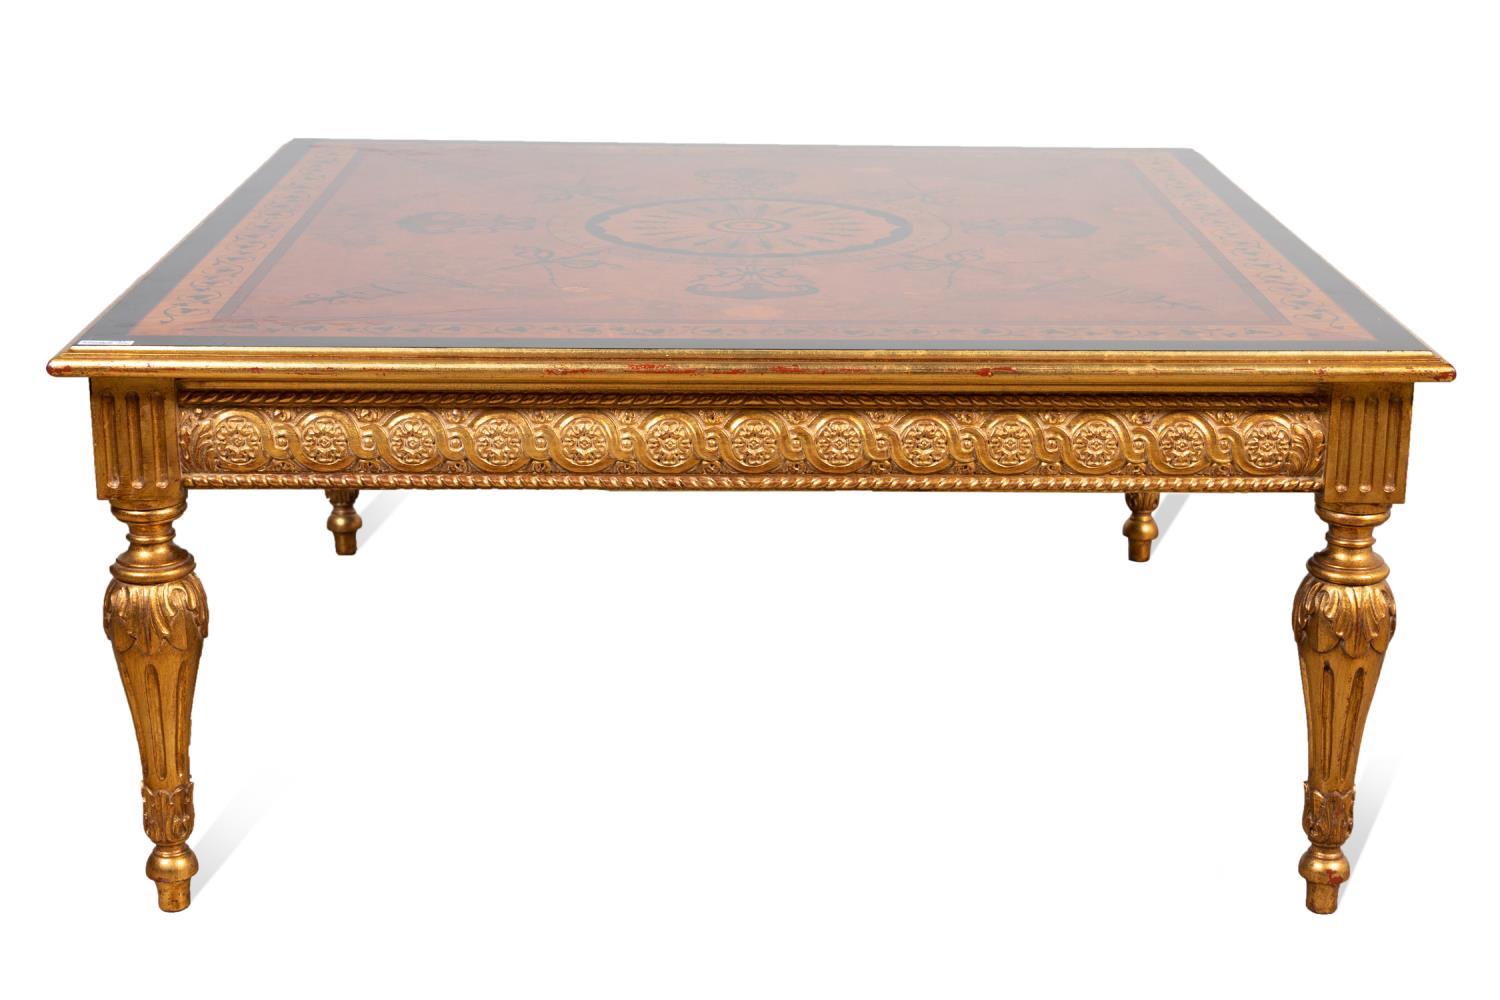 NEOCLASSICAL STYLE GILTWOOD INLAID 35833b